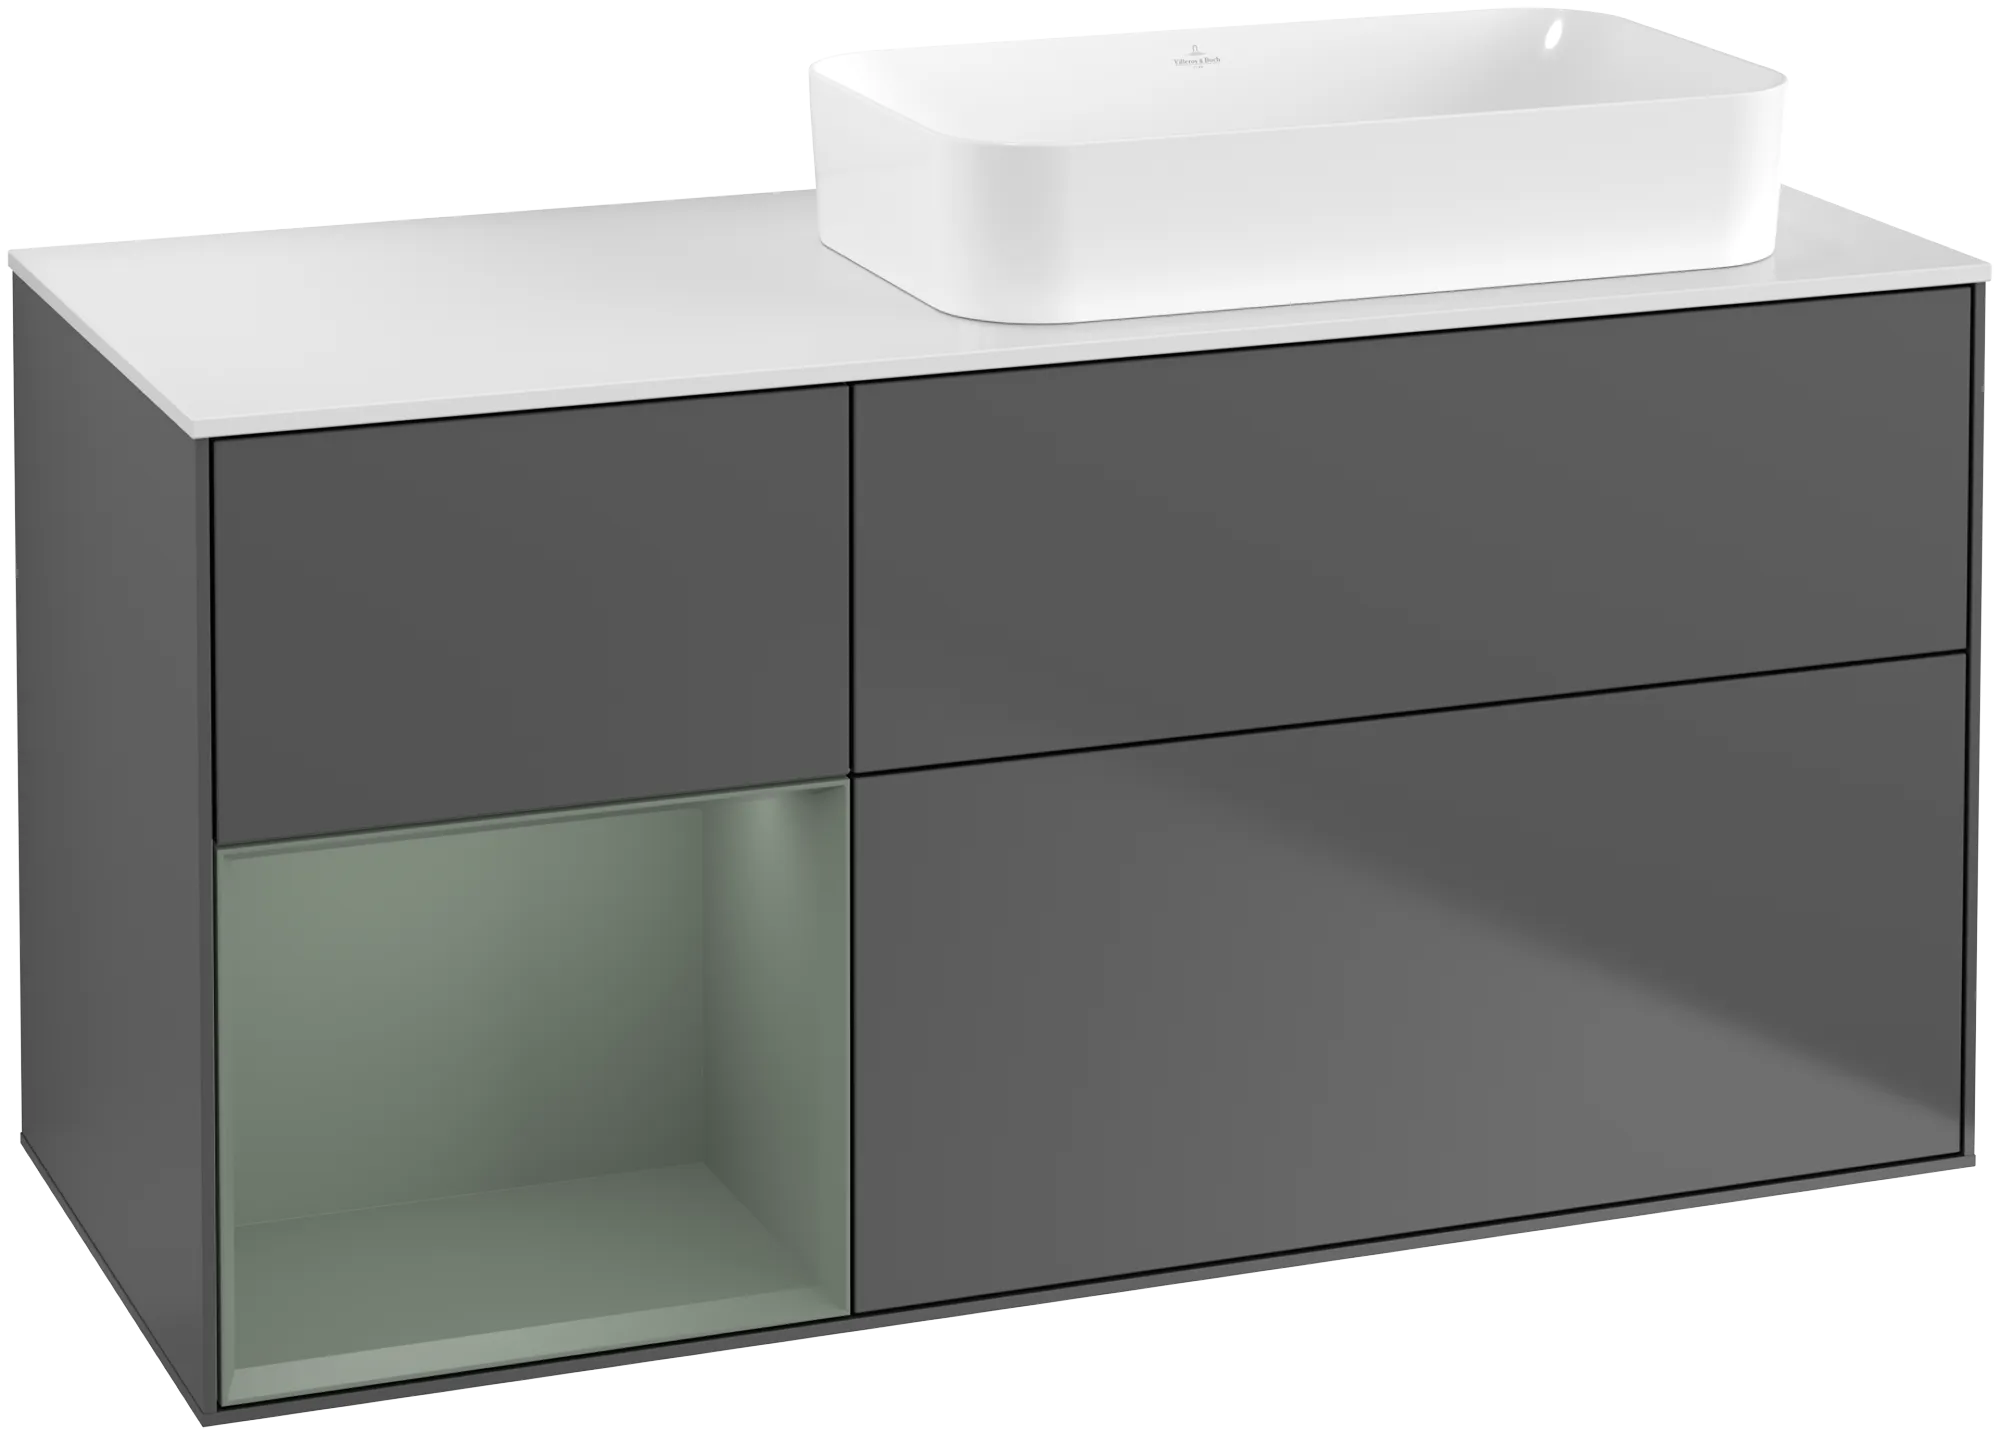 Picture of VILLEROY BOCH Finion Vanity unit, with lighting, 3 pull-out compartments, 1200 x 603 x 501 mm, Anthracite Matt Lacquer / Olive Matt Lacquer / Glass White Matt #G681GMGK